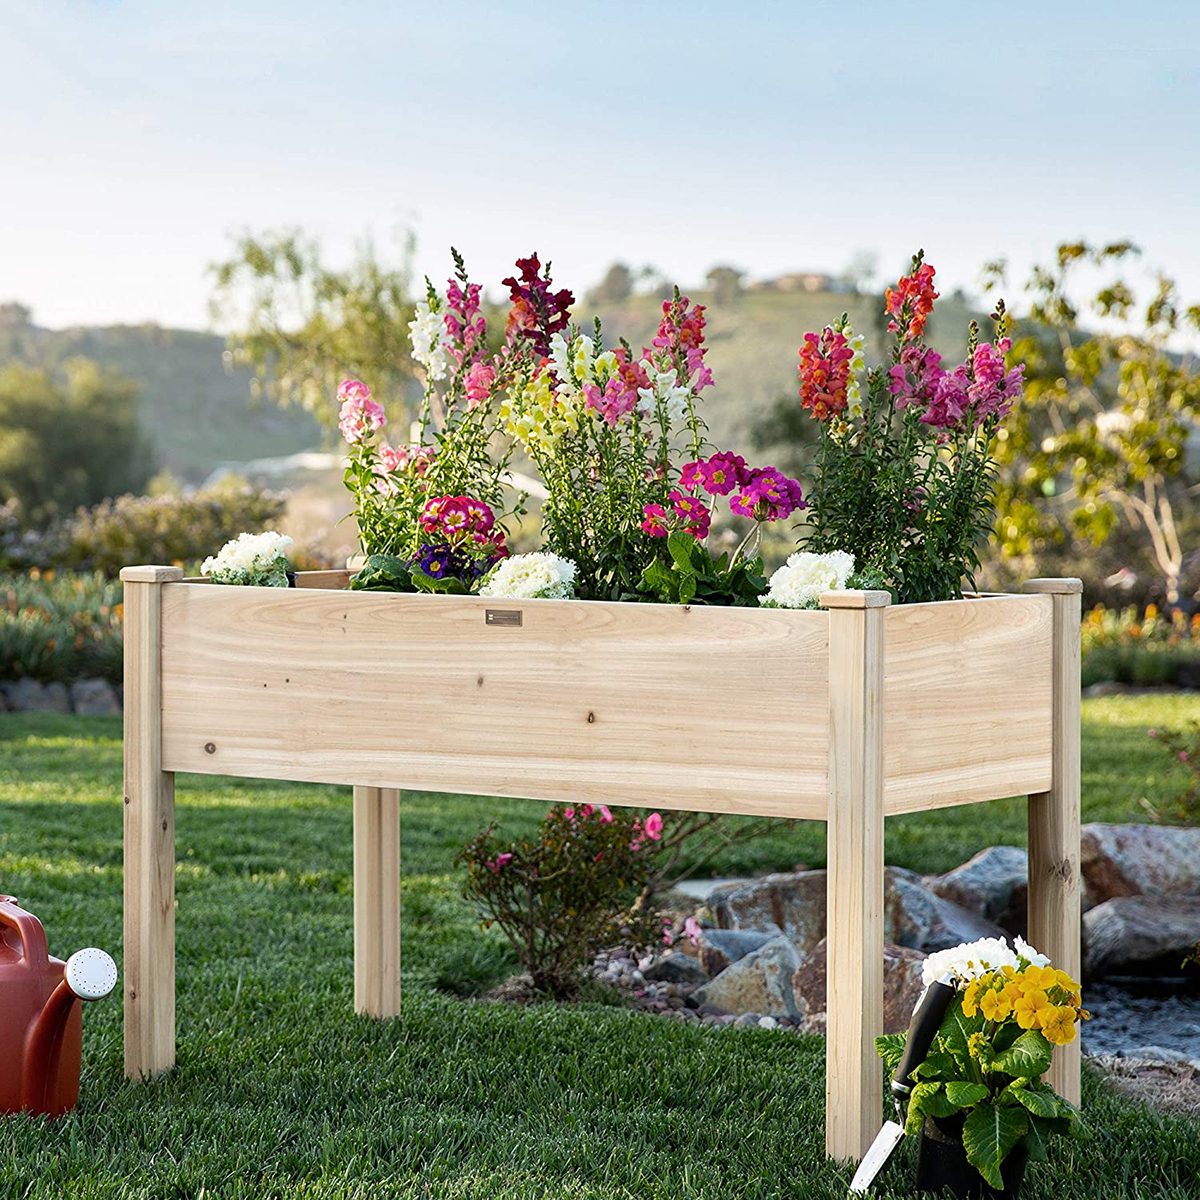 10+ Ways to Grow a Great Raised Bed Garden | Taste of Home